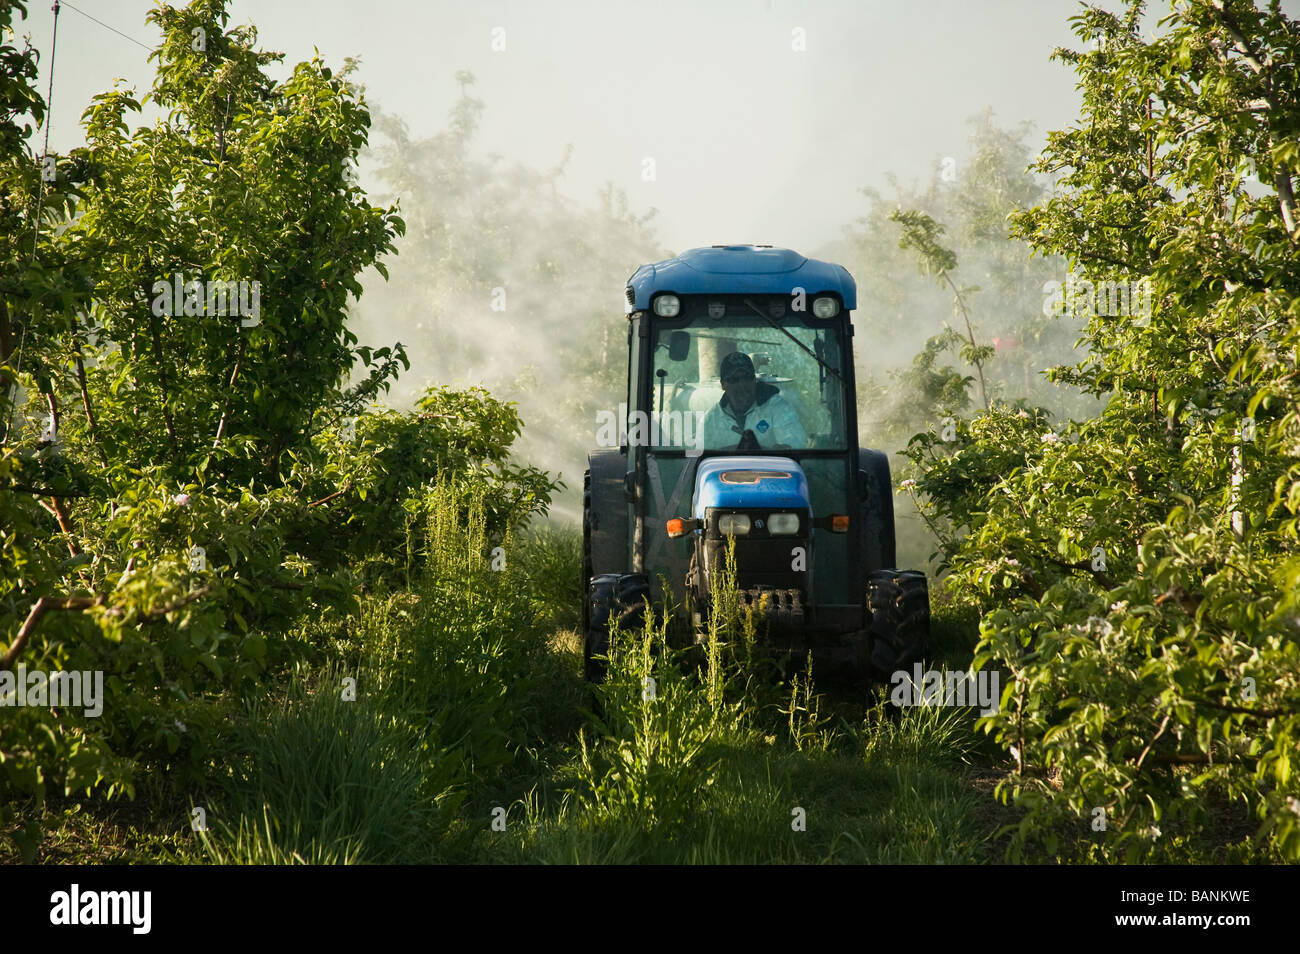 Farmer operating tractor with attached spray rig applying pesticide. Stock Photo